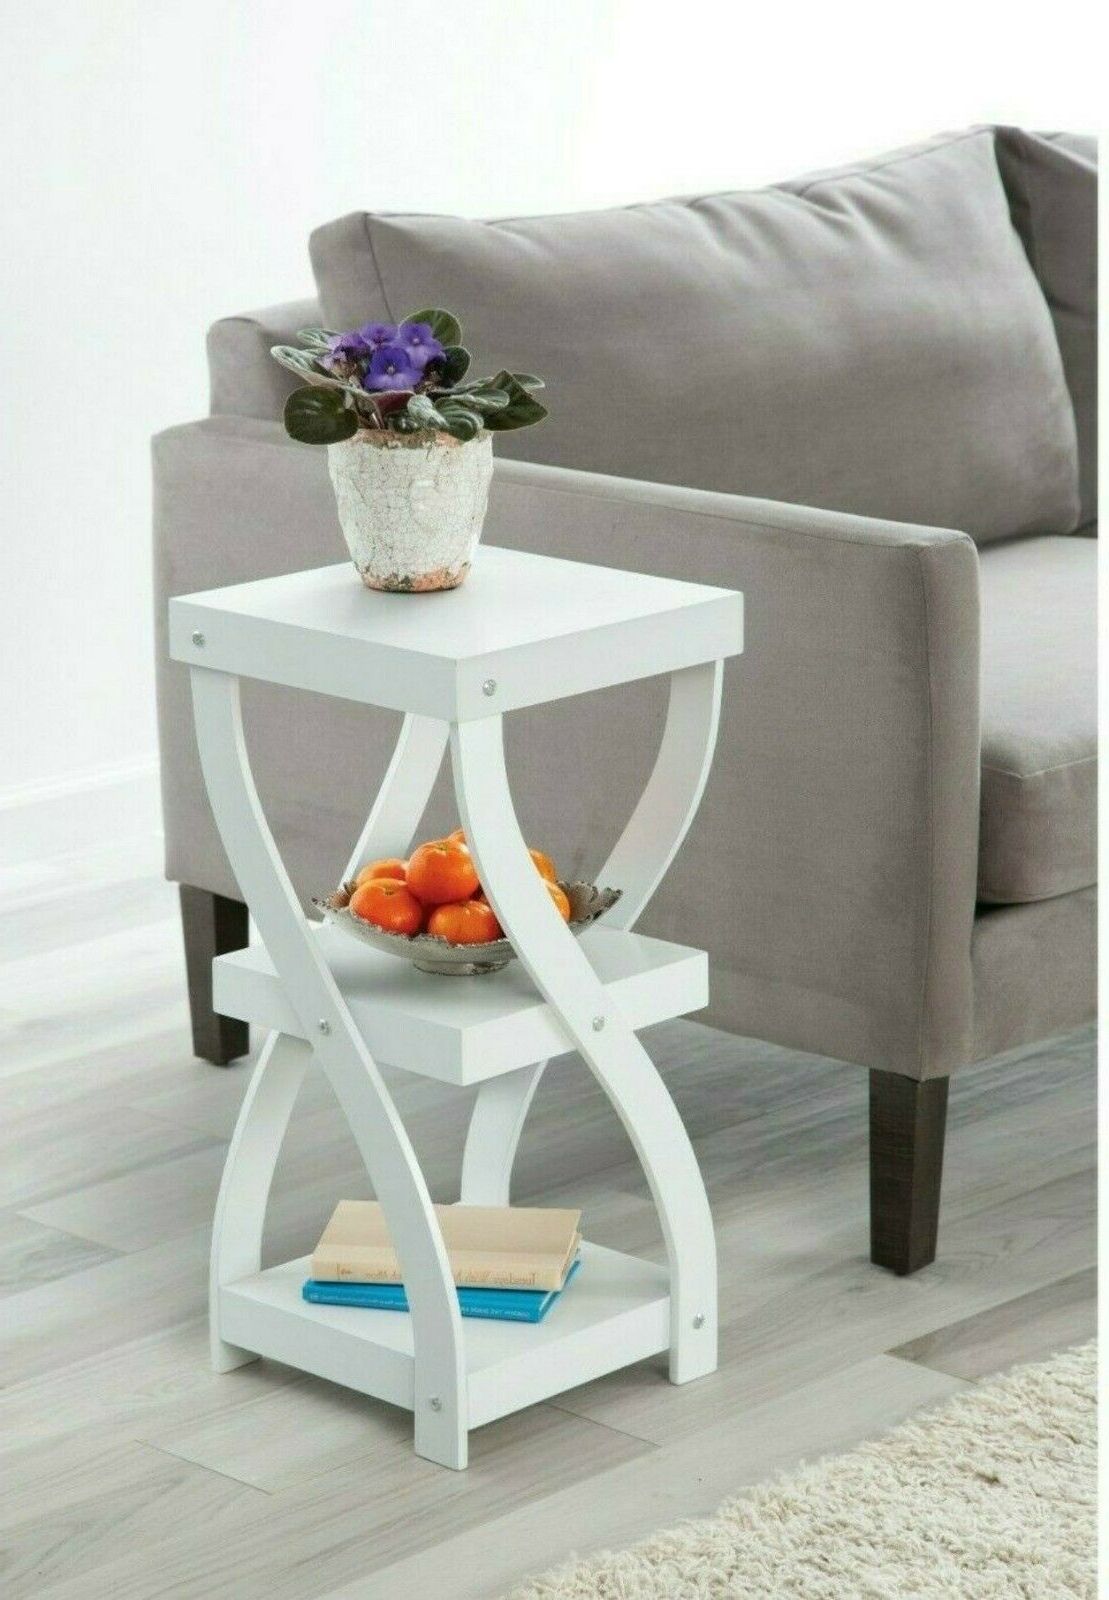 Side Sofa Table  3 Tier Accent Coffee Entrance Table White Wooden Modern  Twisted Design Console End Table With Shelves – Walmart Pertaining To Well Known Wood Accent Coffee Tables (View 17 of 20)